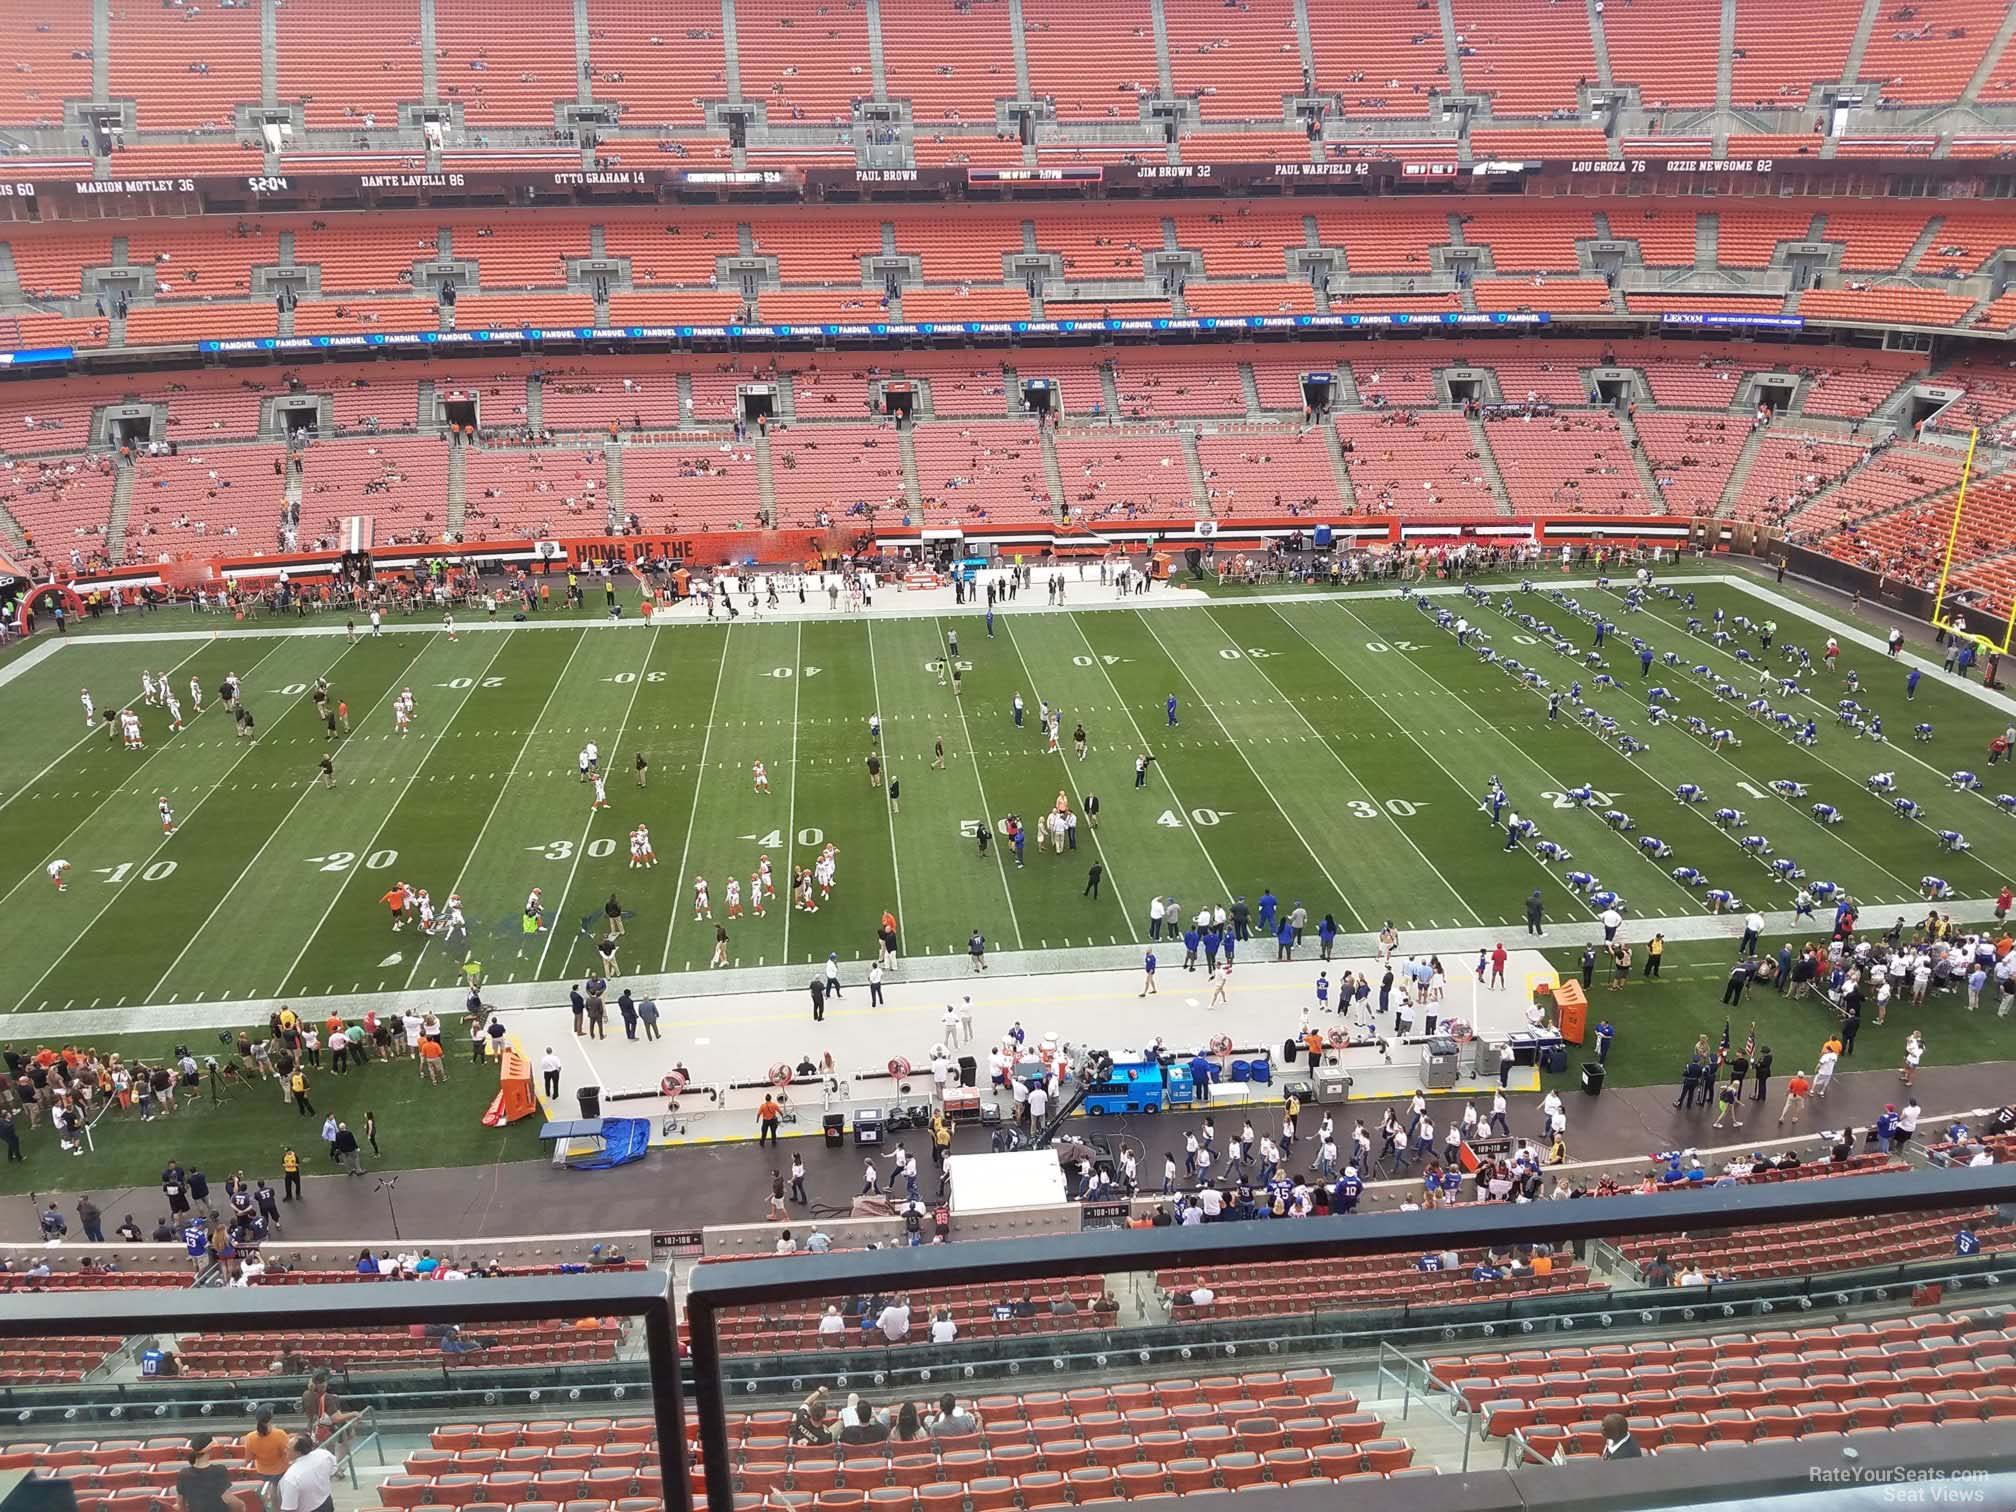 section 508, row 2 seat view  - cleveland browns stadium